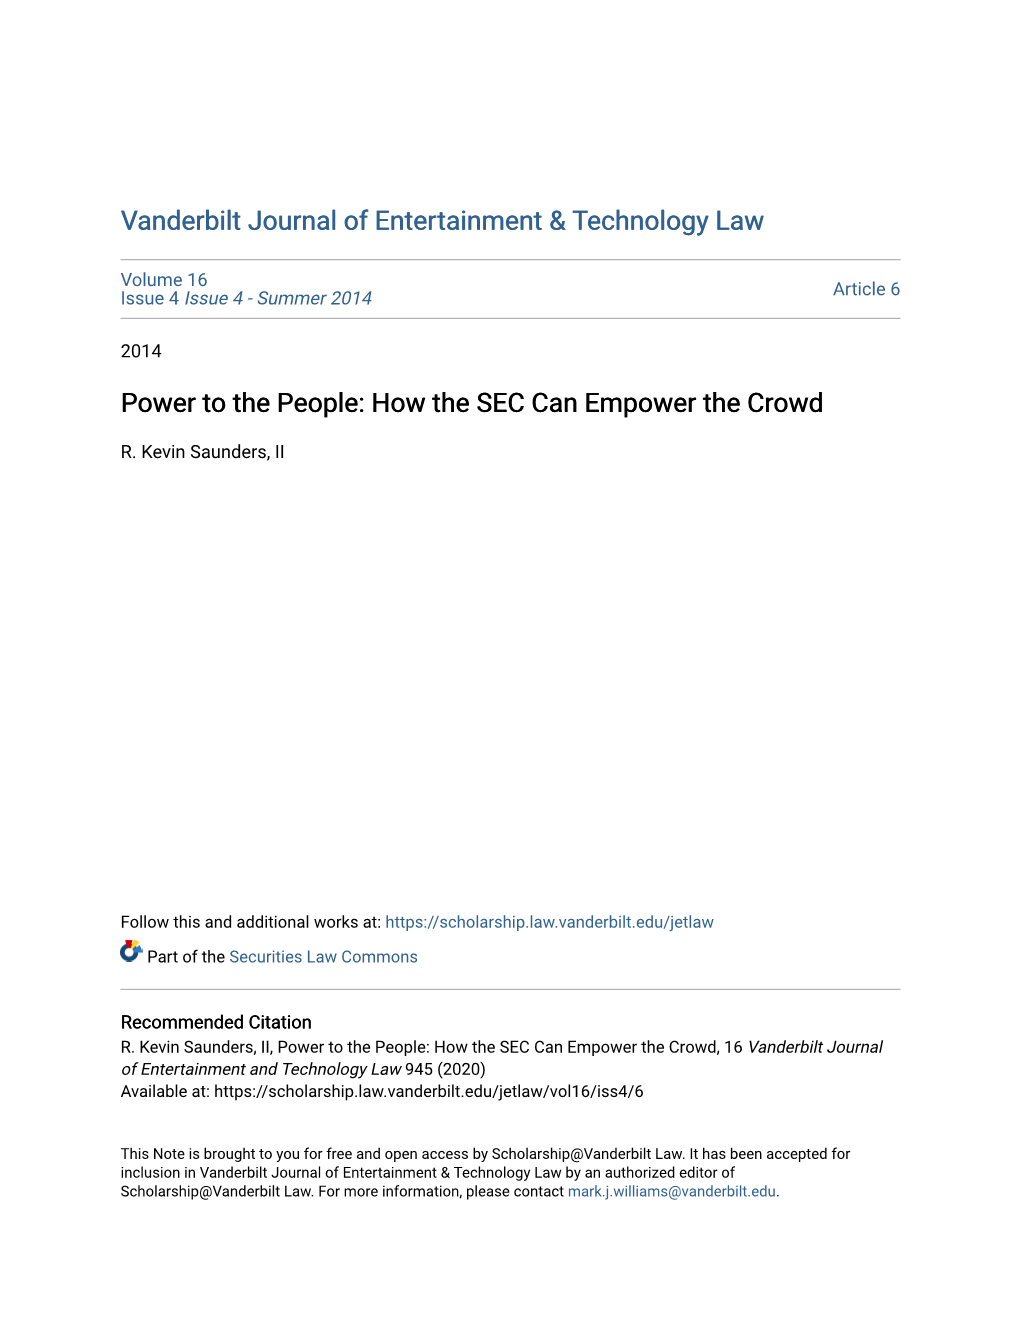 How the SEC Can Empower the Crowd